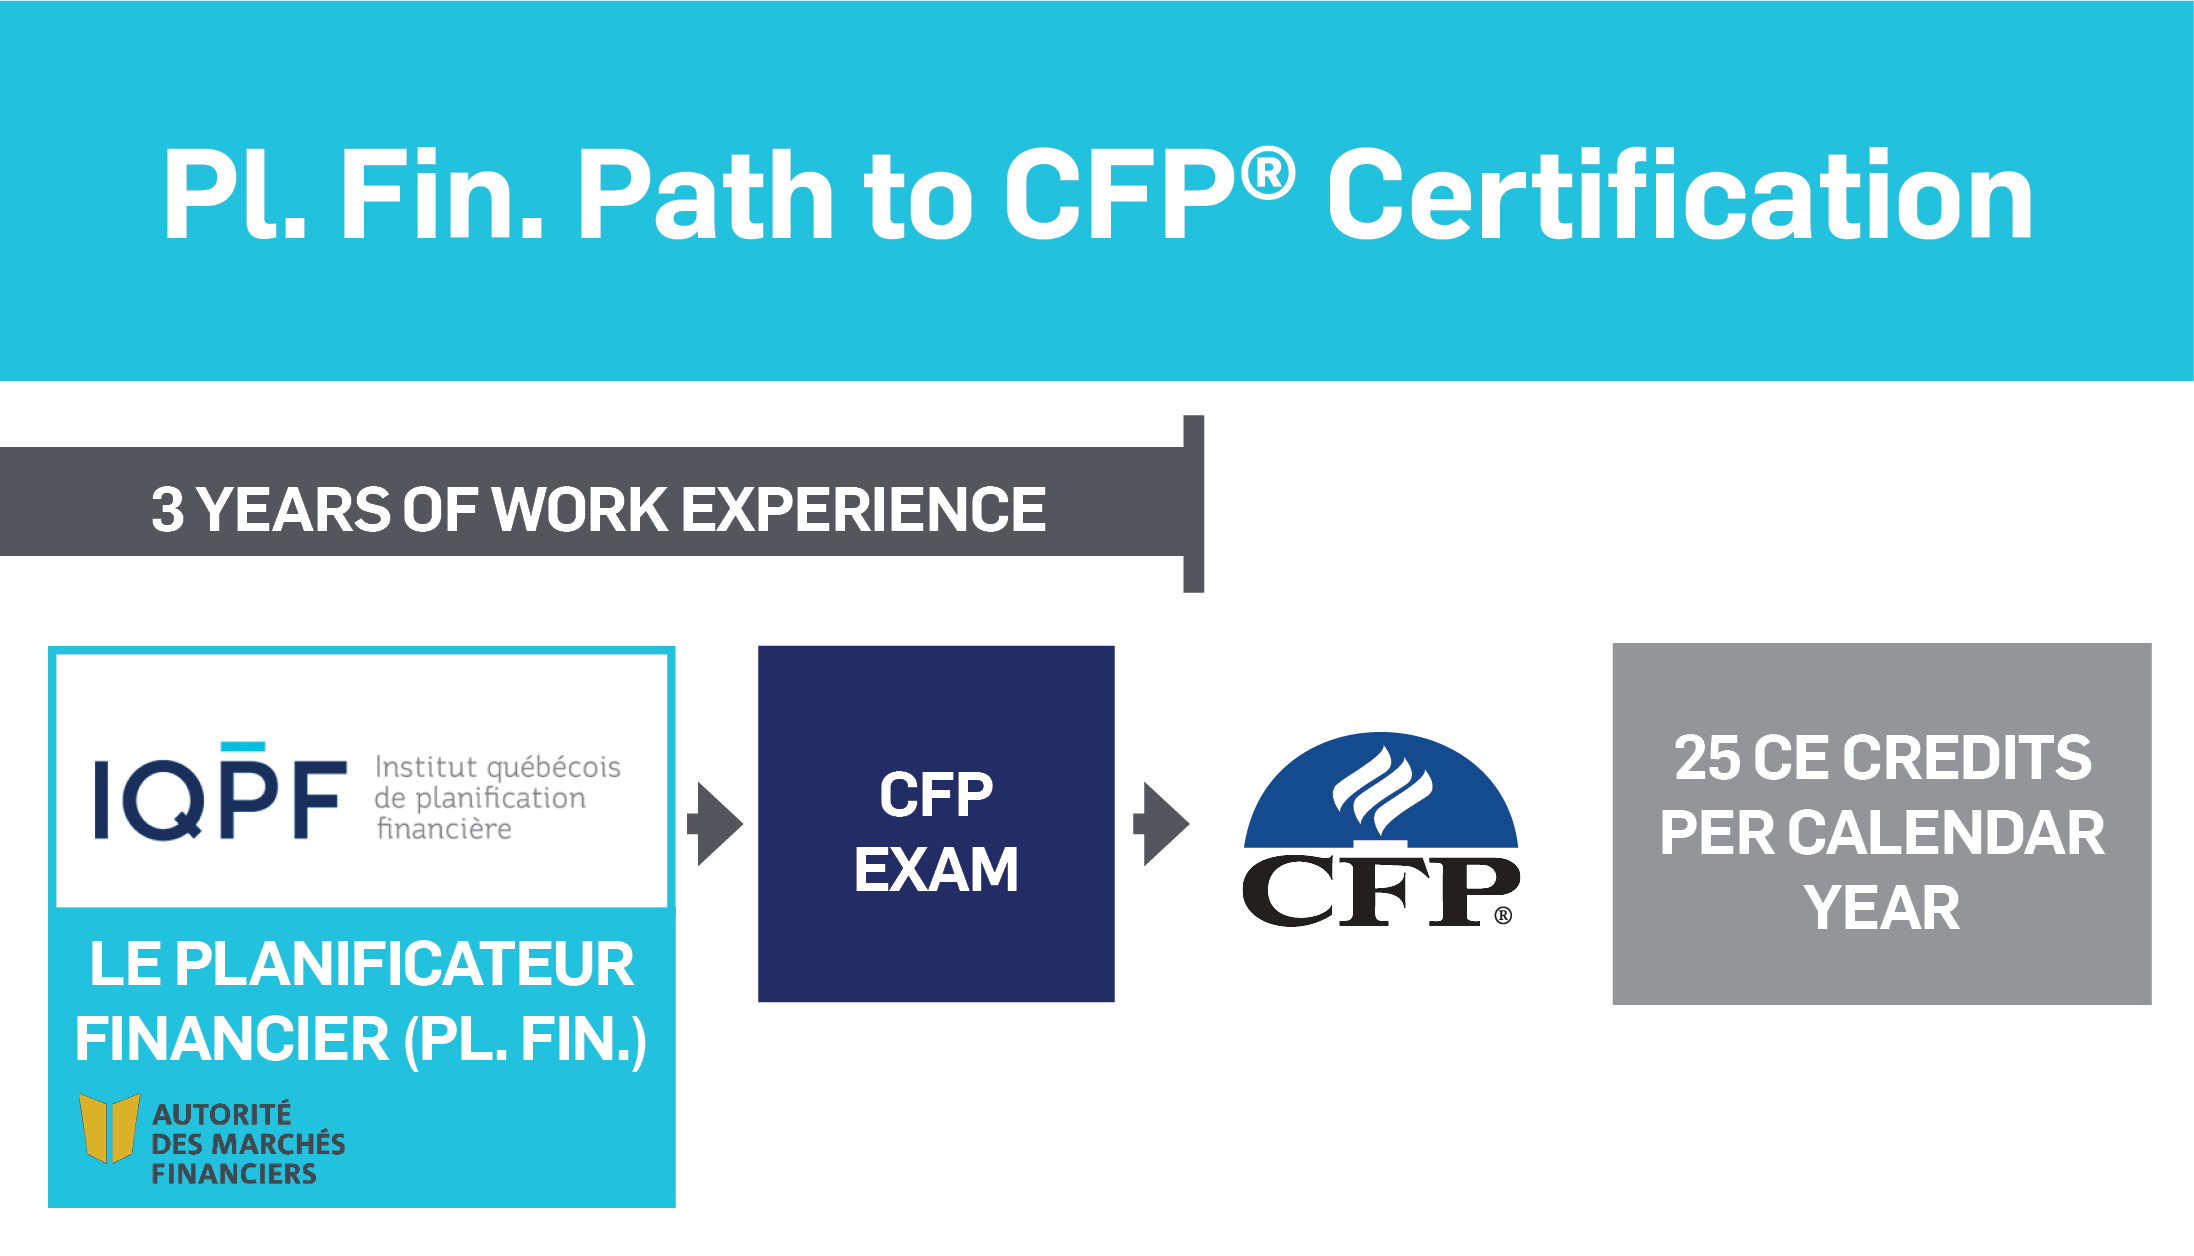 Pl. Fin. Path to CFP Certification